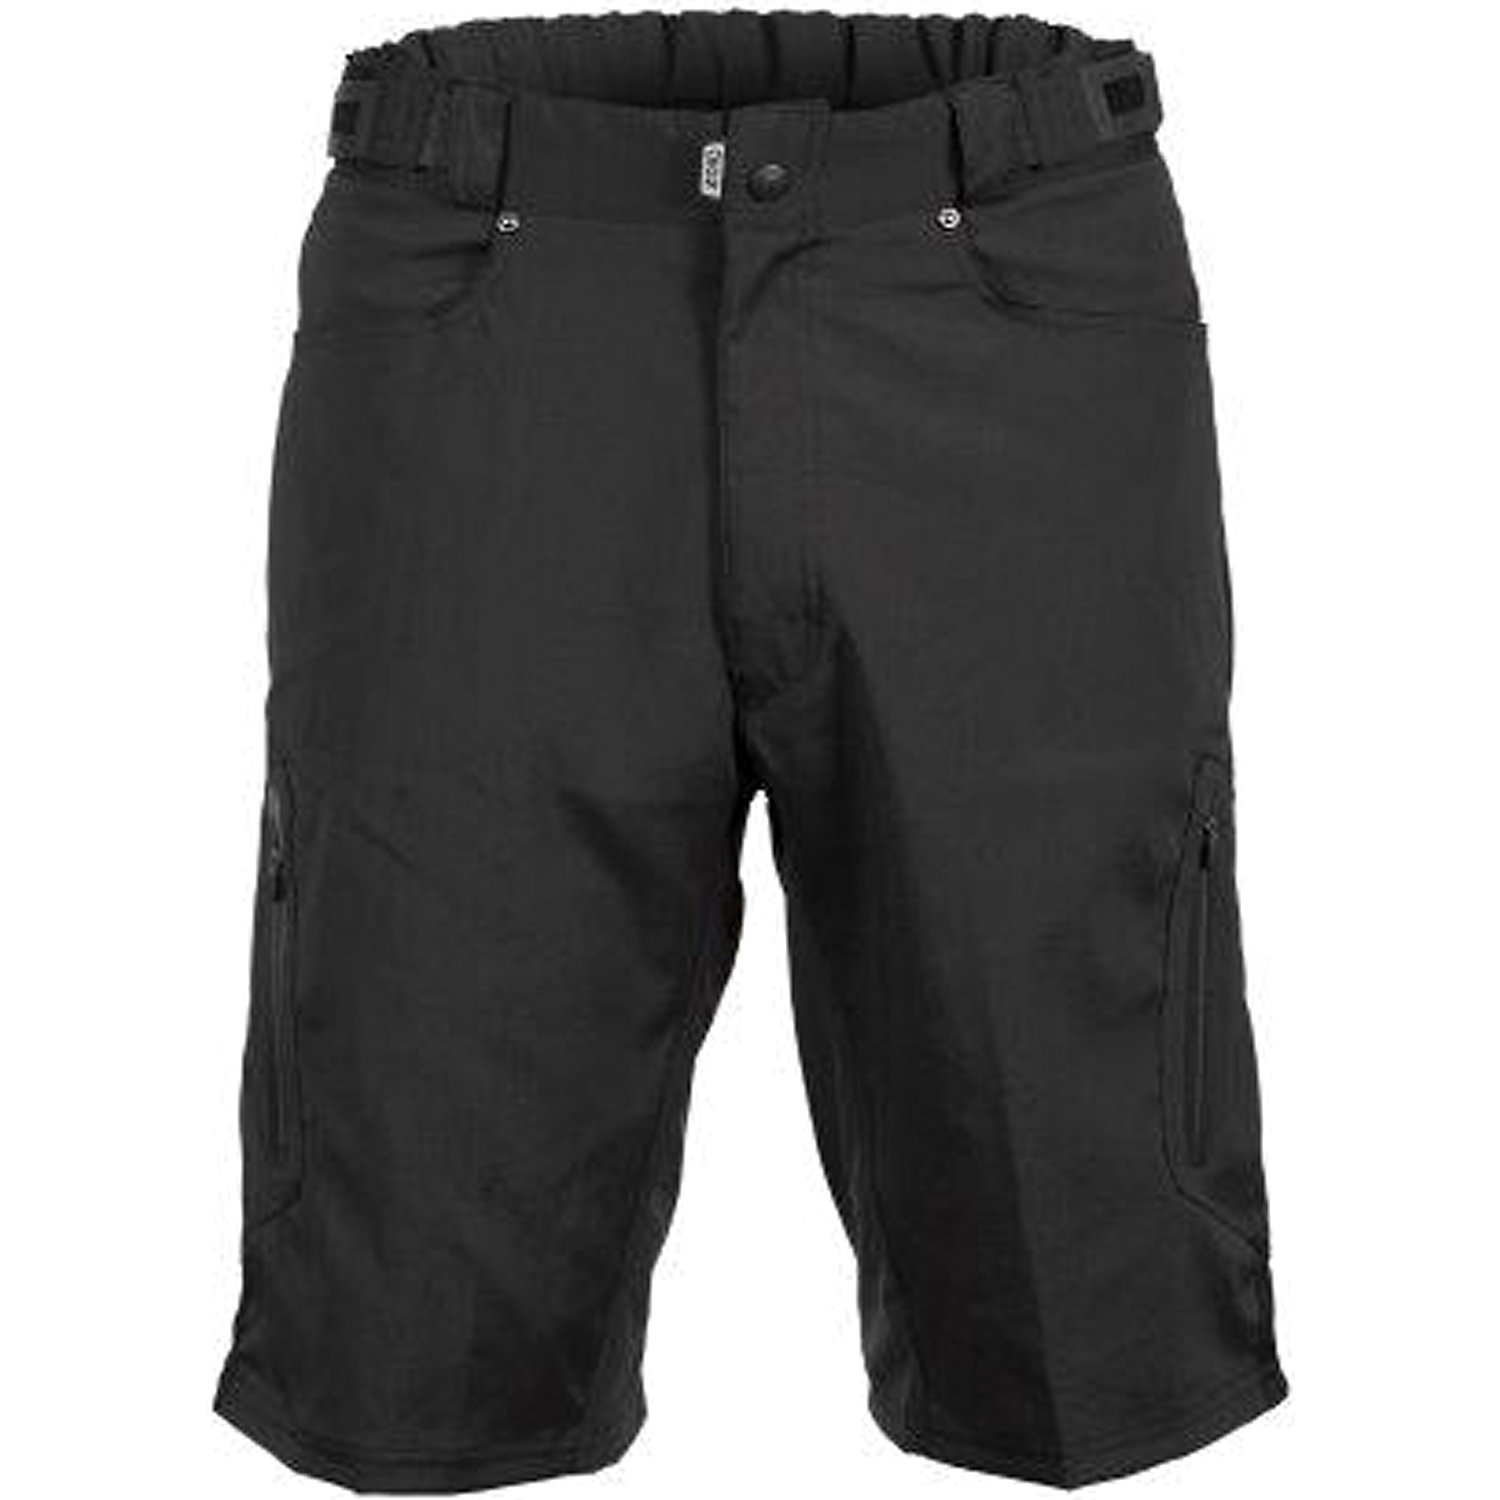 Zoic Mens Ether Short - Essential Liner